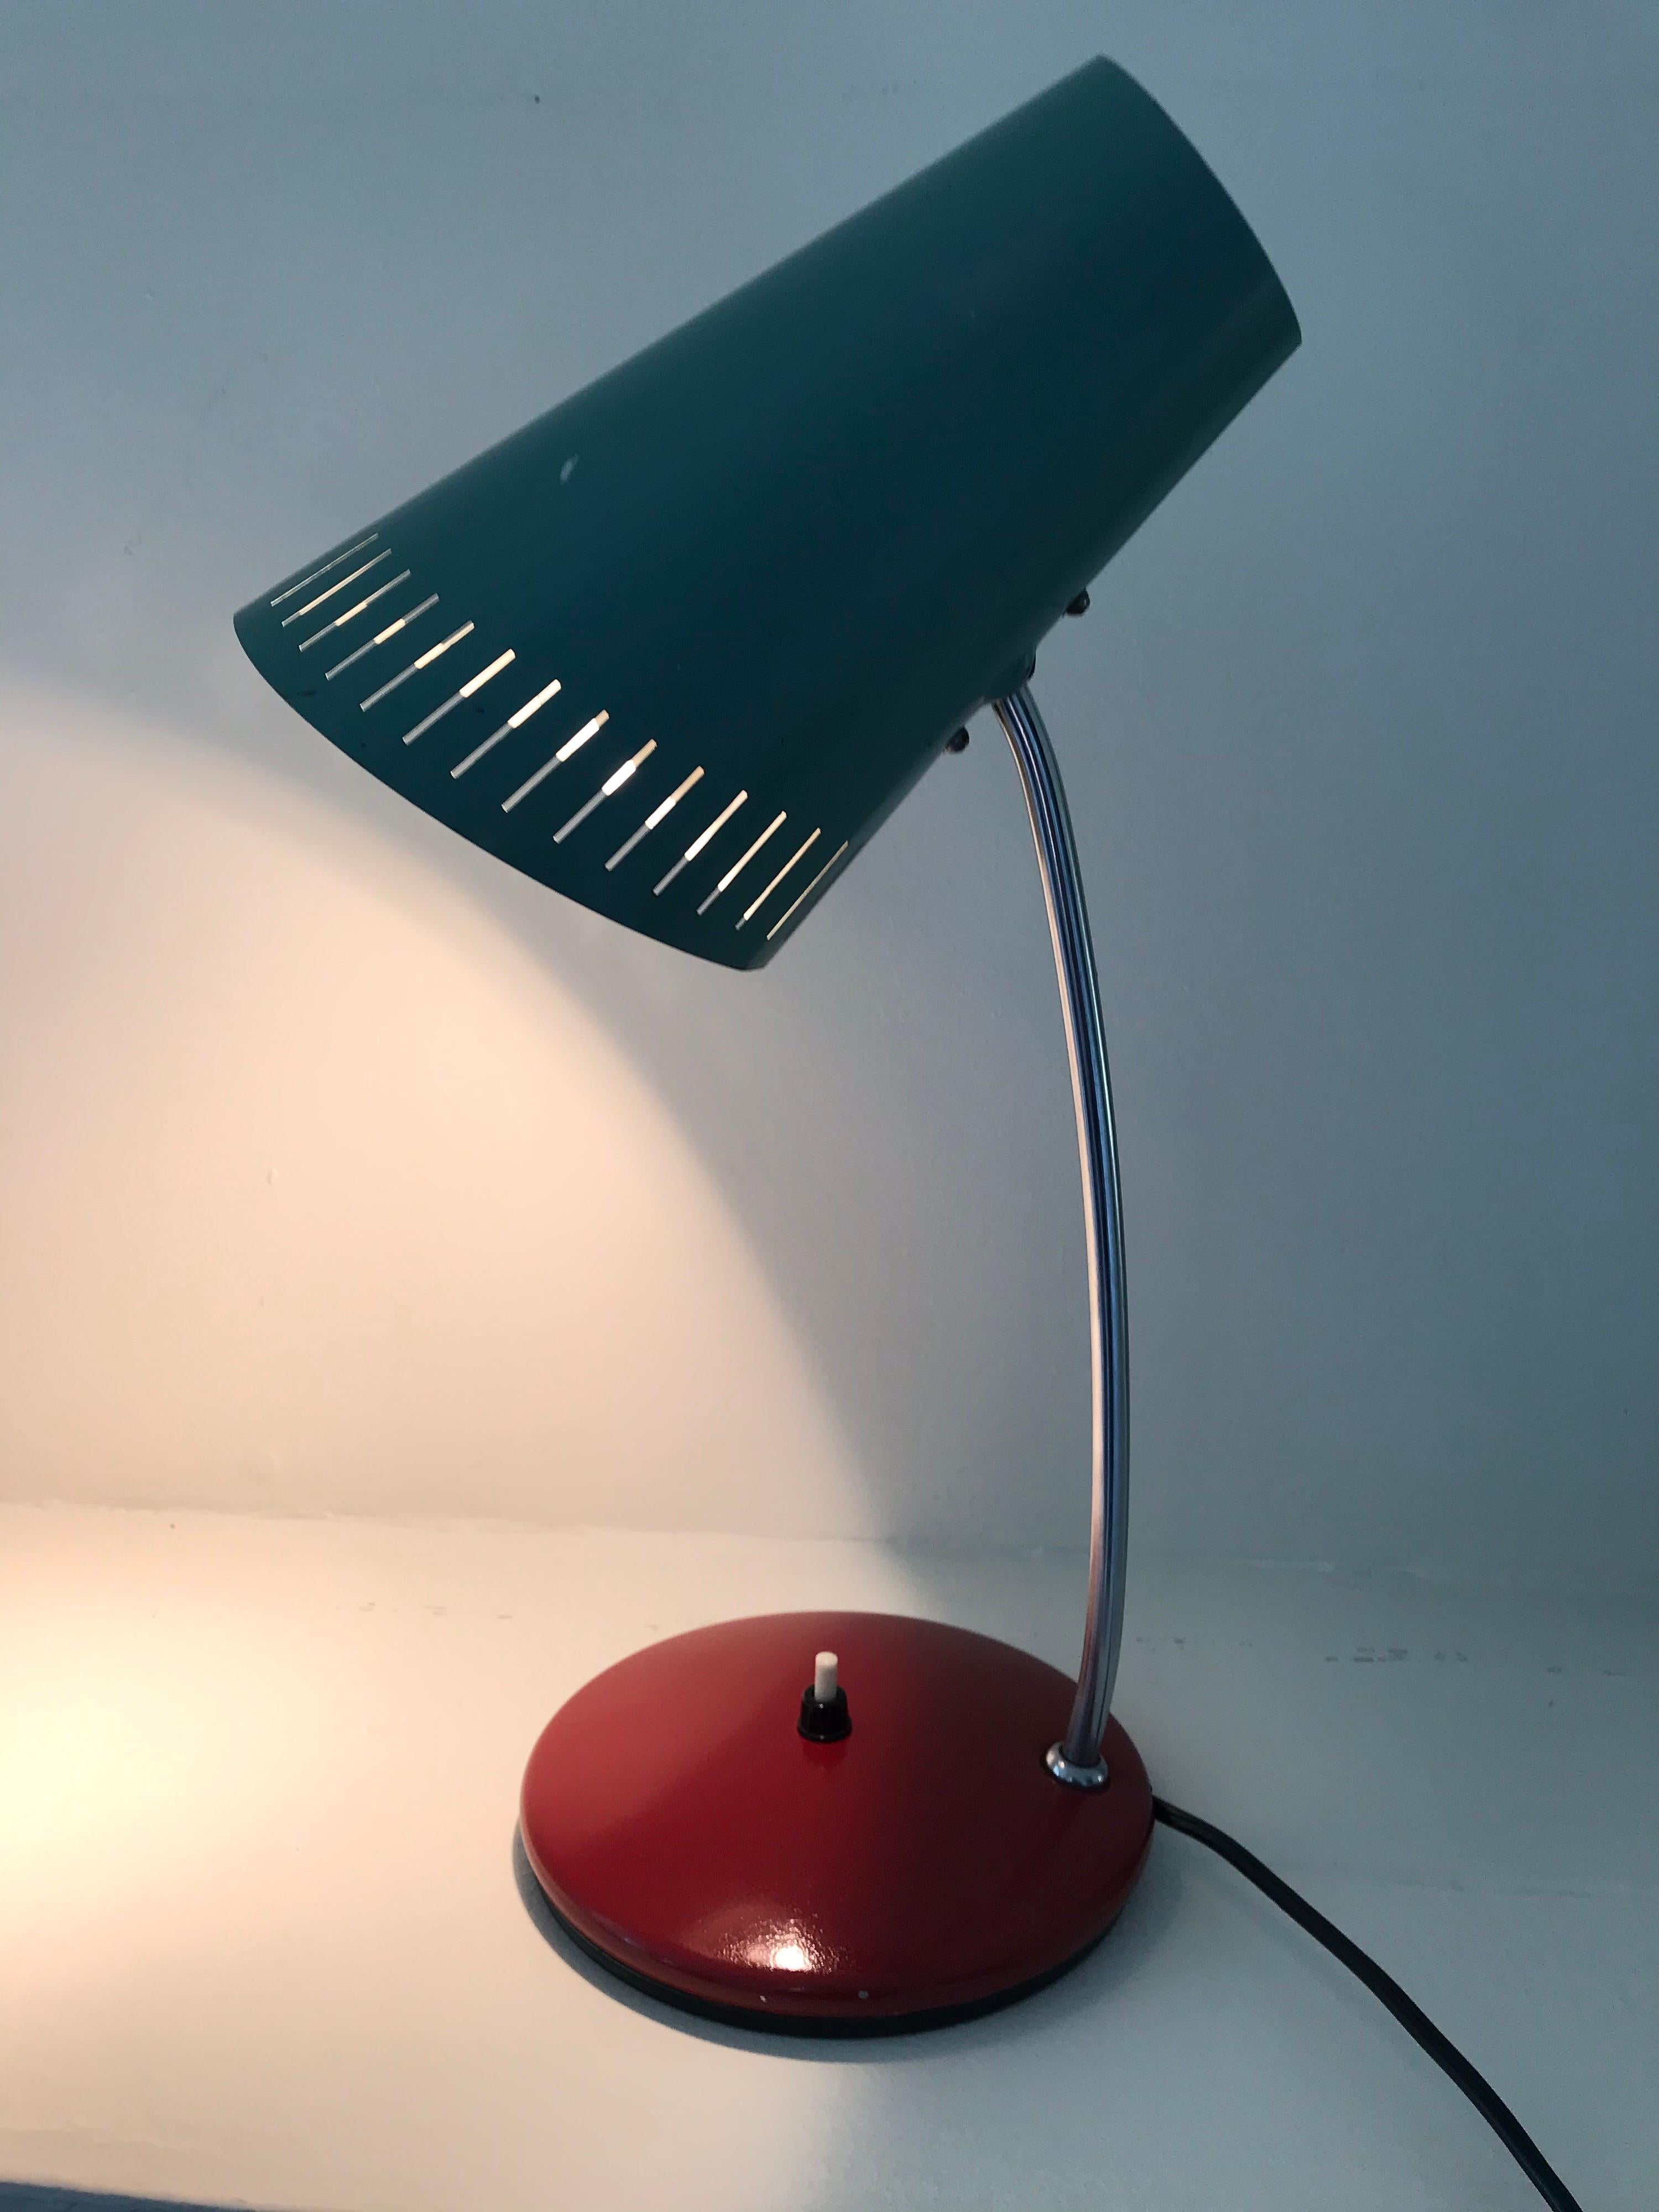 Mid-Century Modern Cone Shaped Desk Lamp, Turquoise and Red, Russia, 1966 For Sale 2